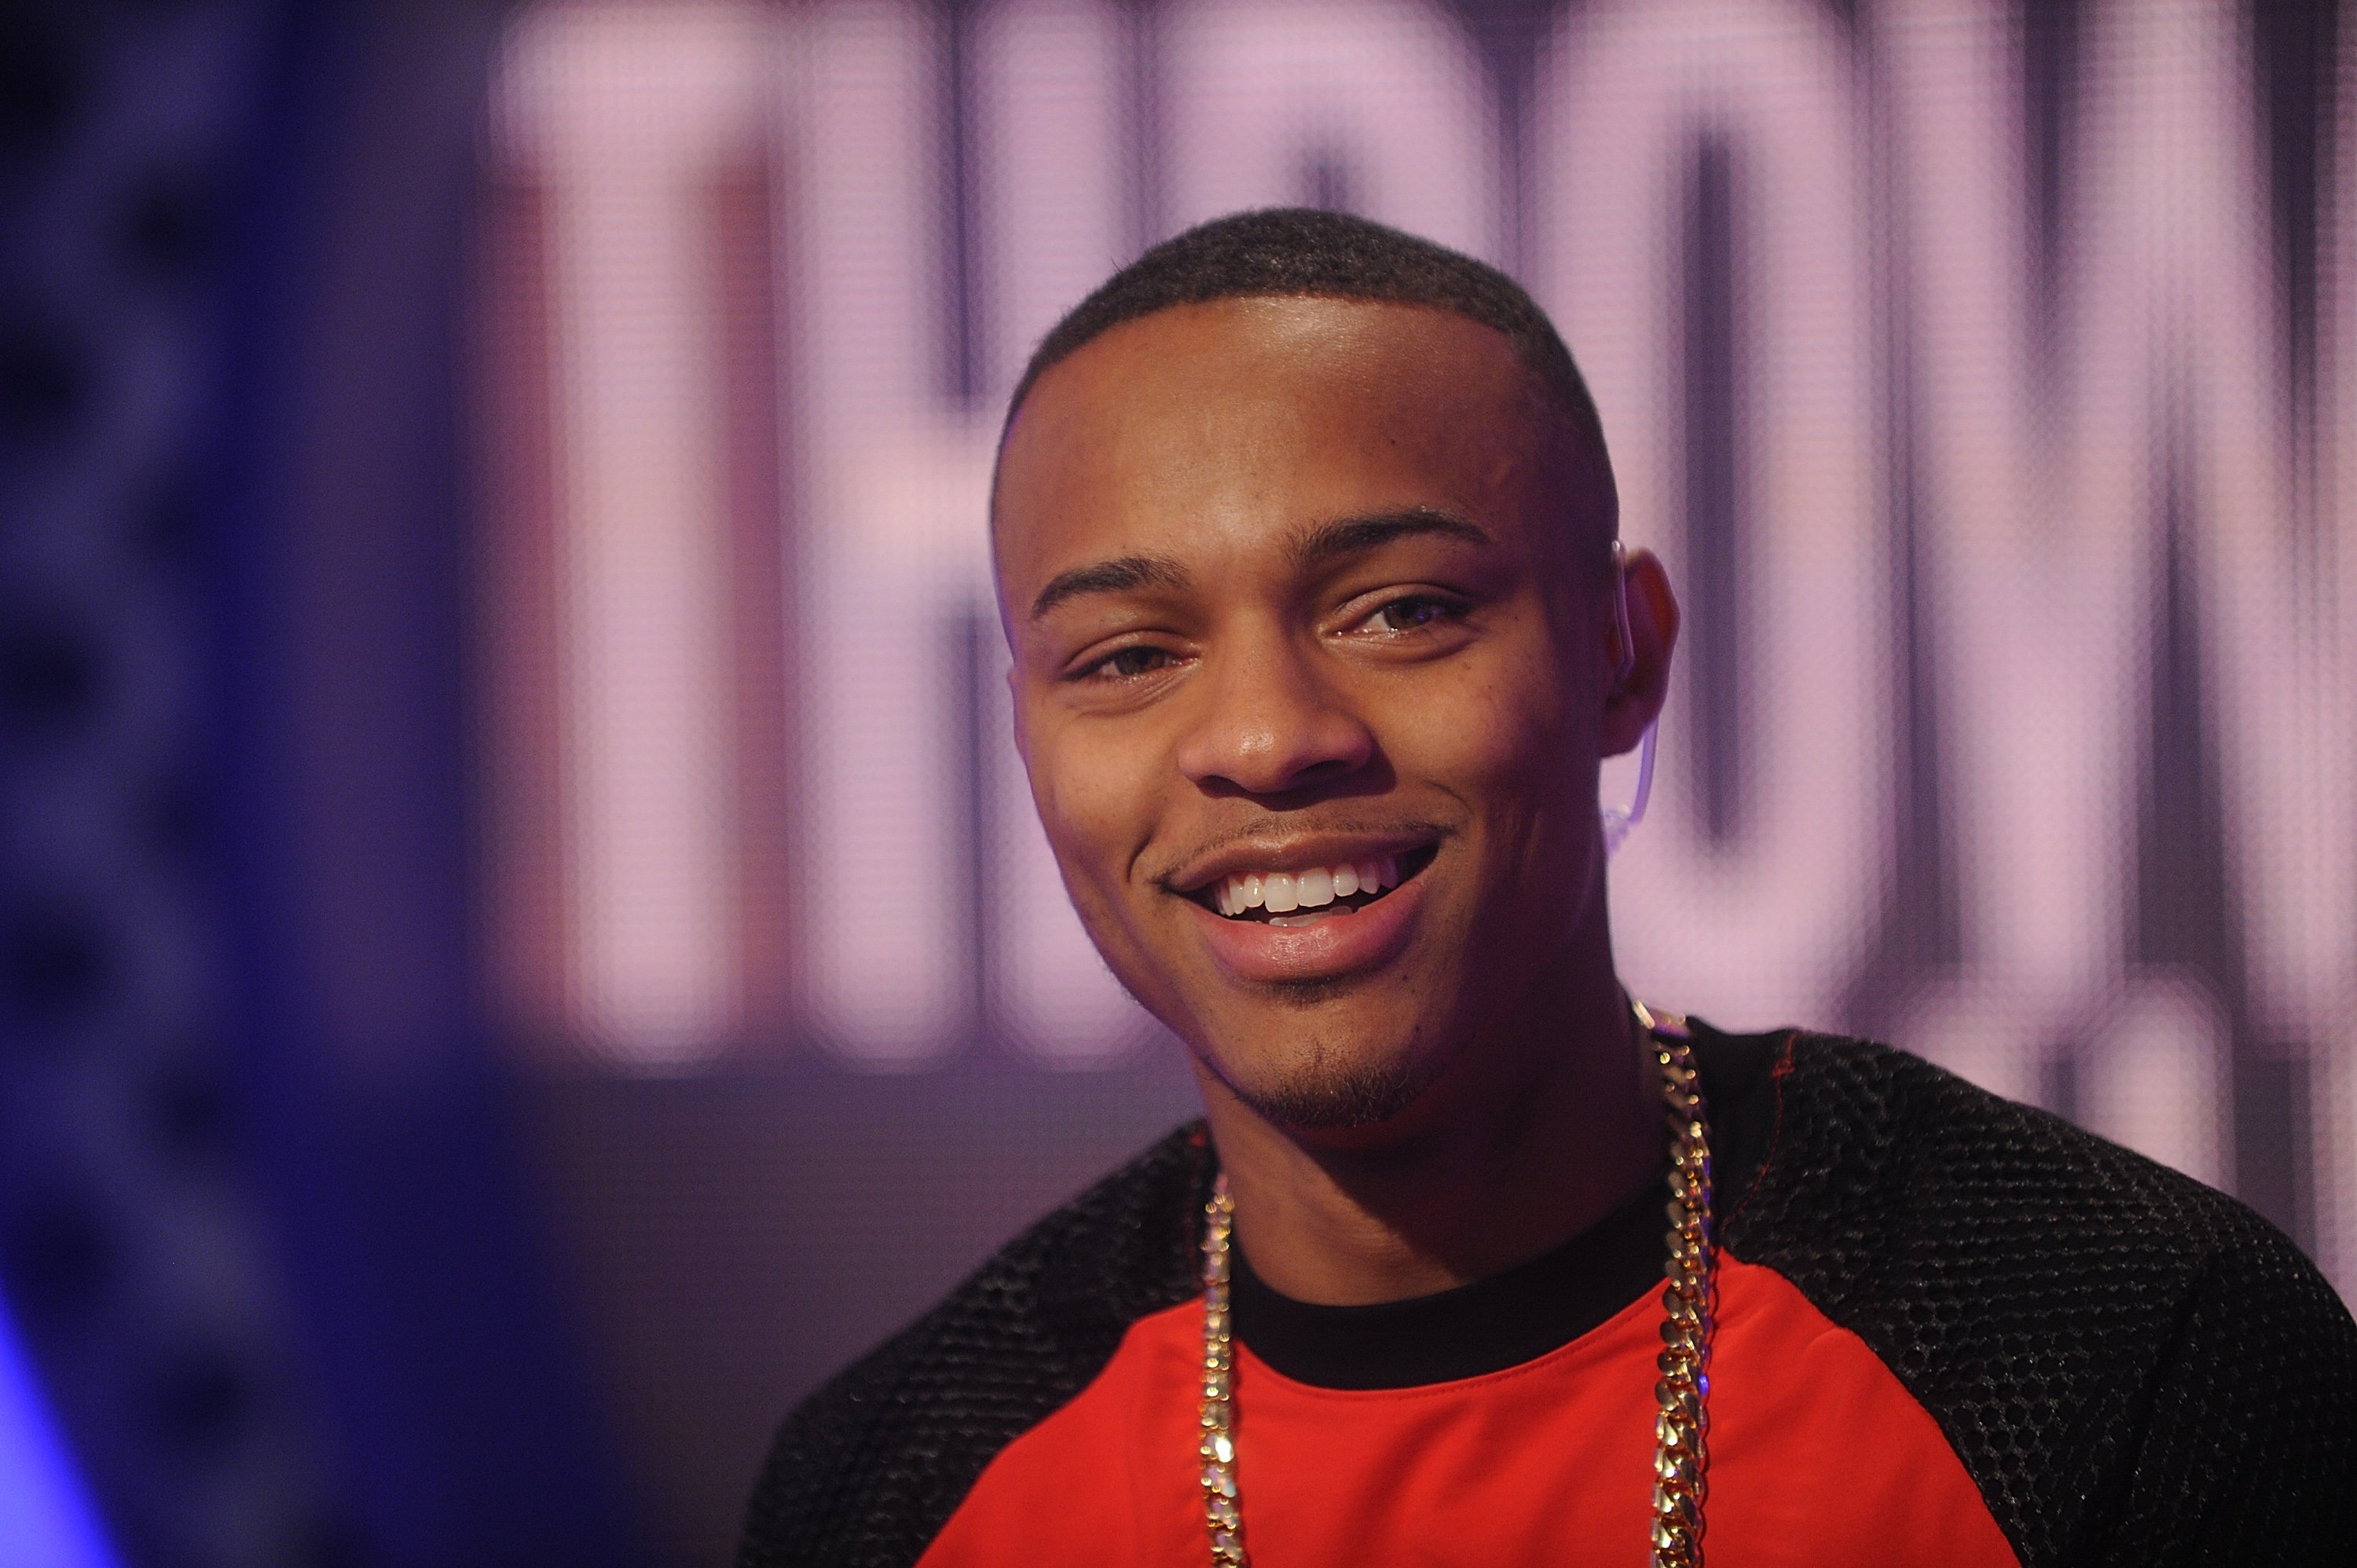 Bow Wow at the BET 106 and Park studio in New York City on June 11, 2014. | Photo: Getty Images